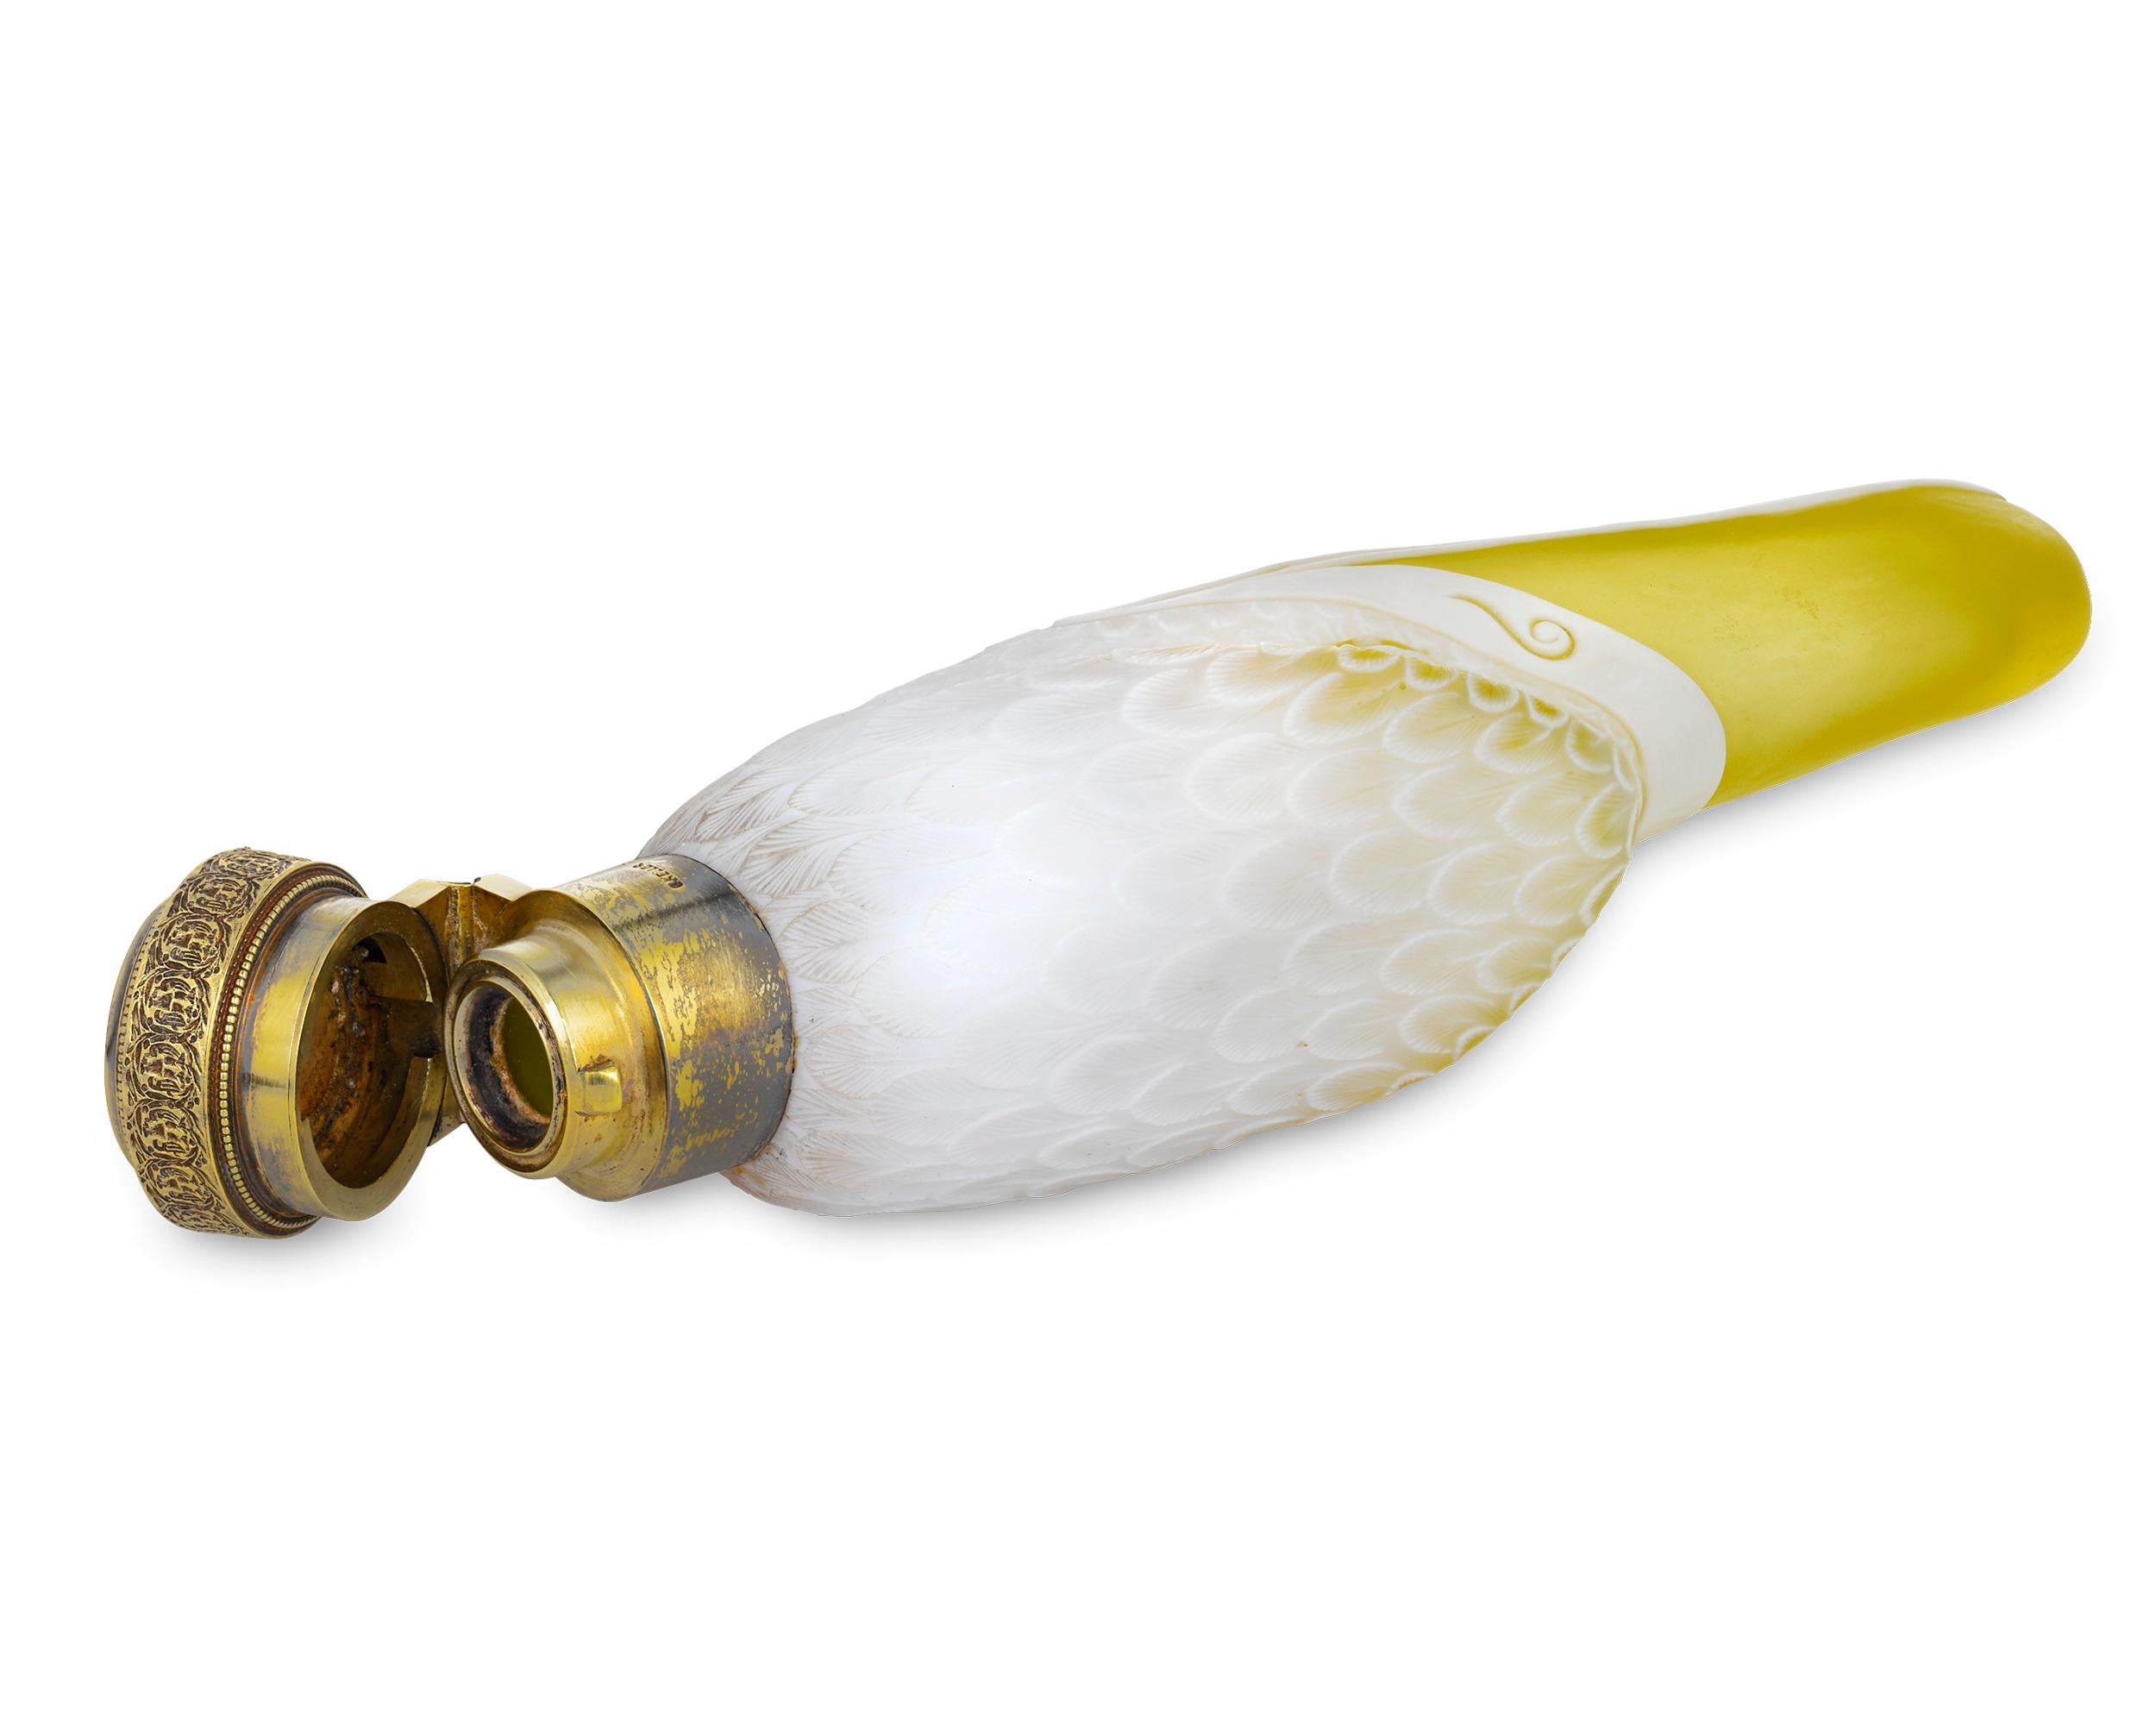 This exceptionally rare cameo glass perfume bottle by Thomas Webb & Sons takes the form of an albatross. The upper layer of opal glass is expertly carved to reveal the brilliant yellow glass beneath, lending the bottle an impressive amount of depth